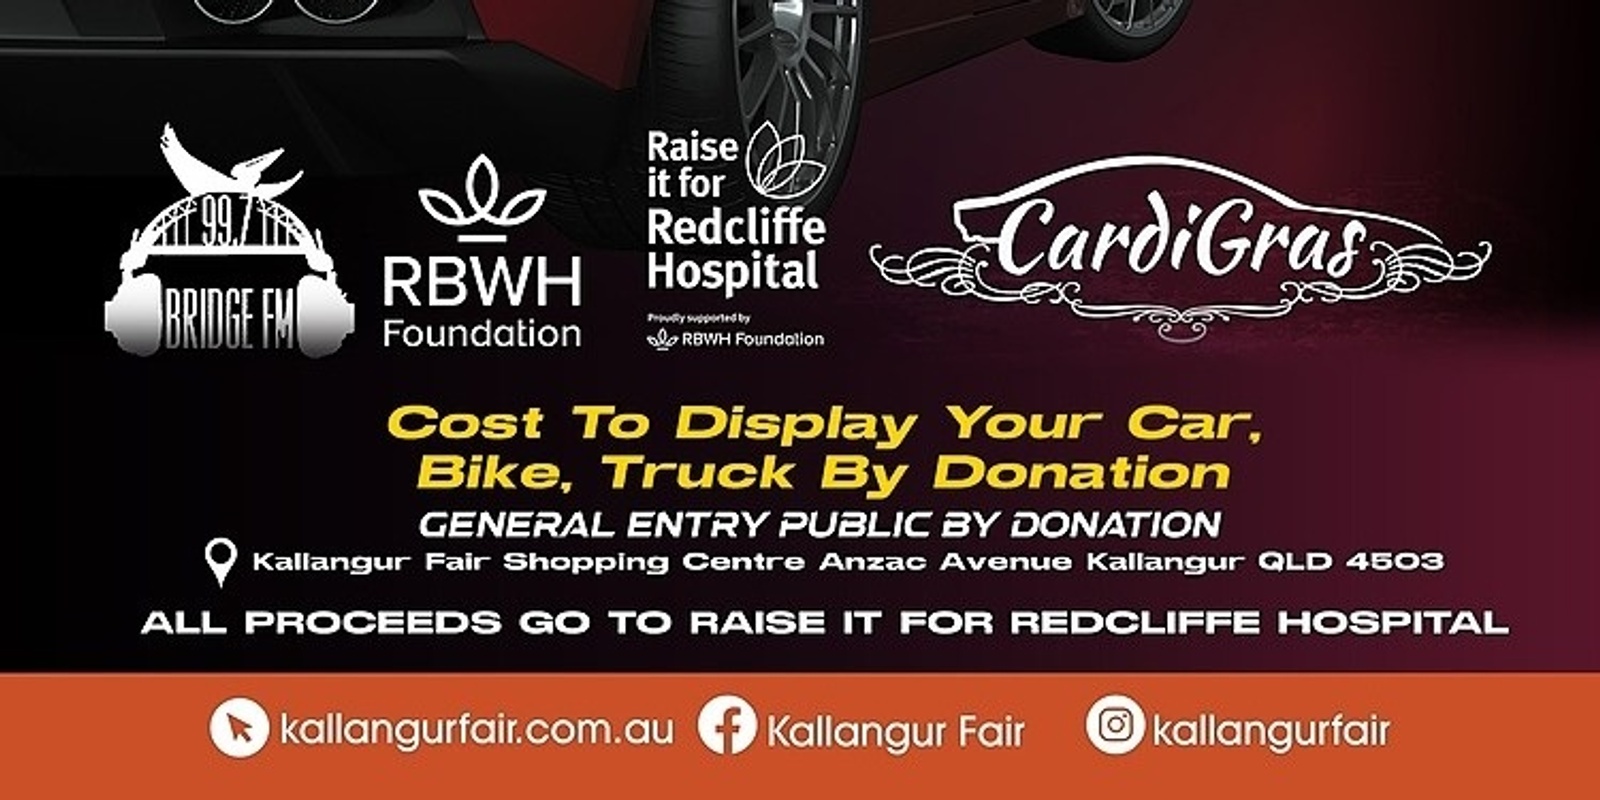 Banner image for CardiGras Dinner With The Cars Kallangur